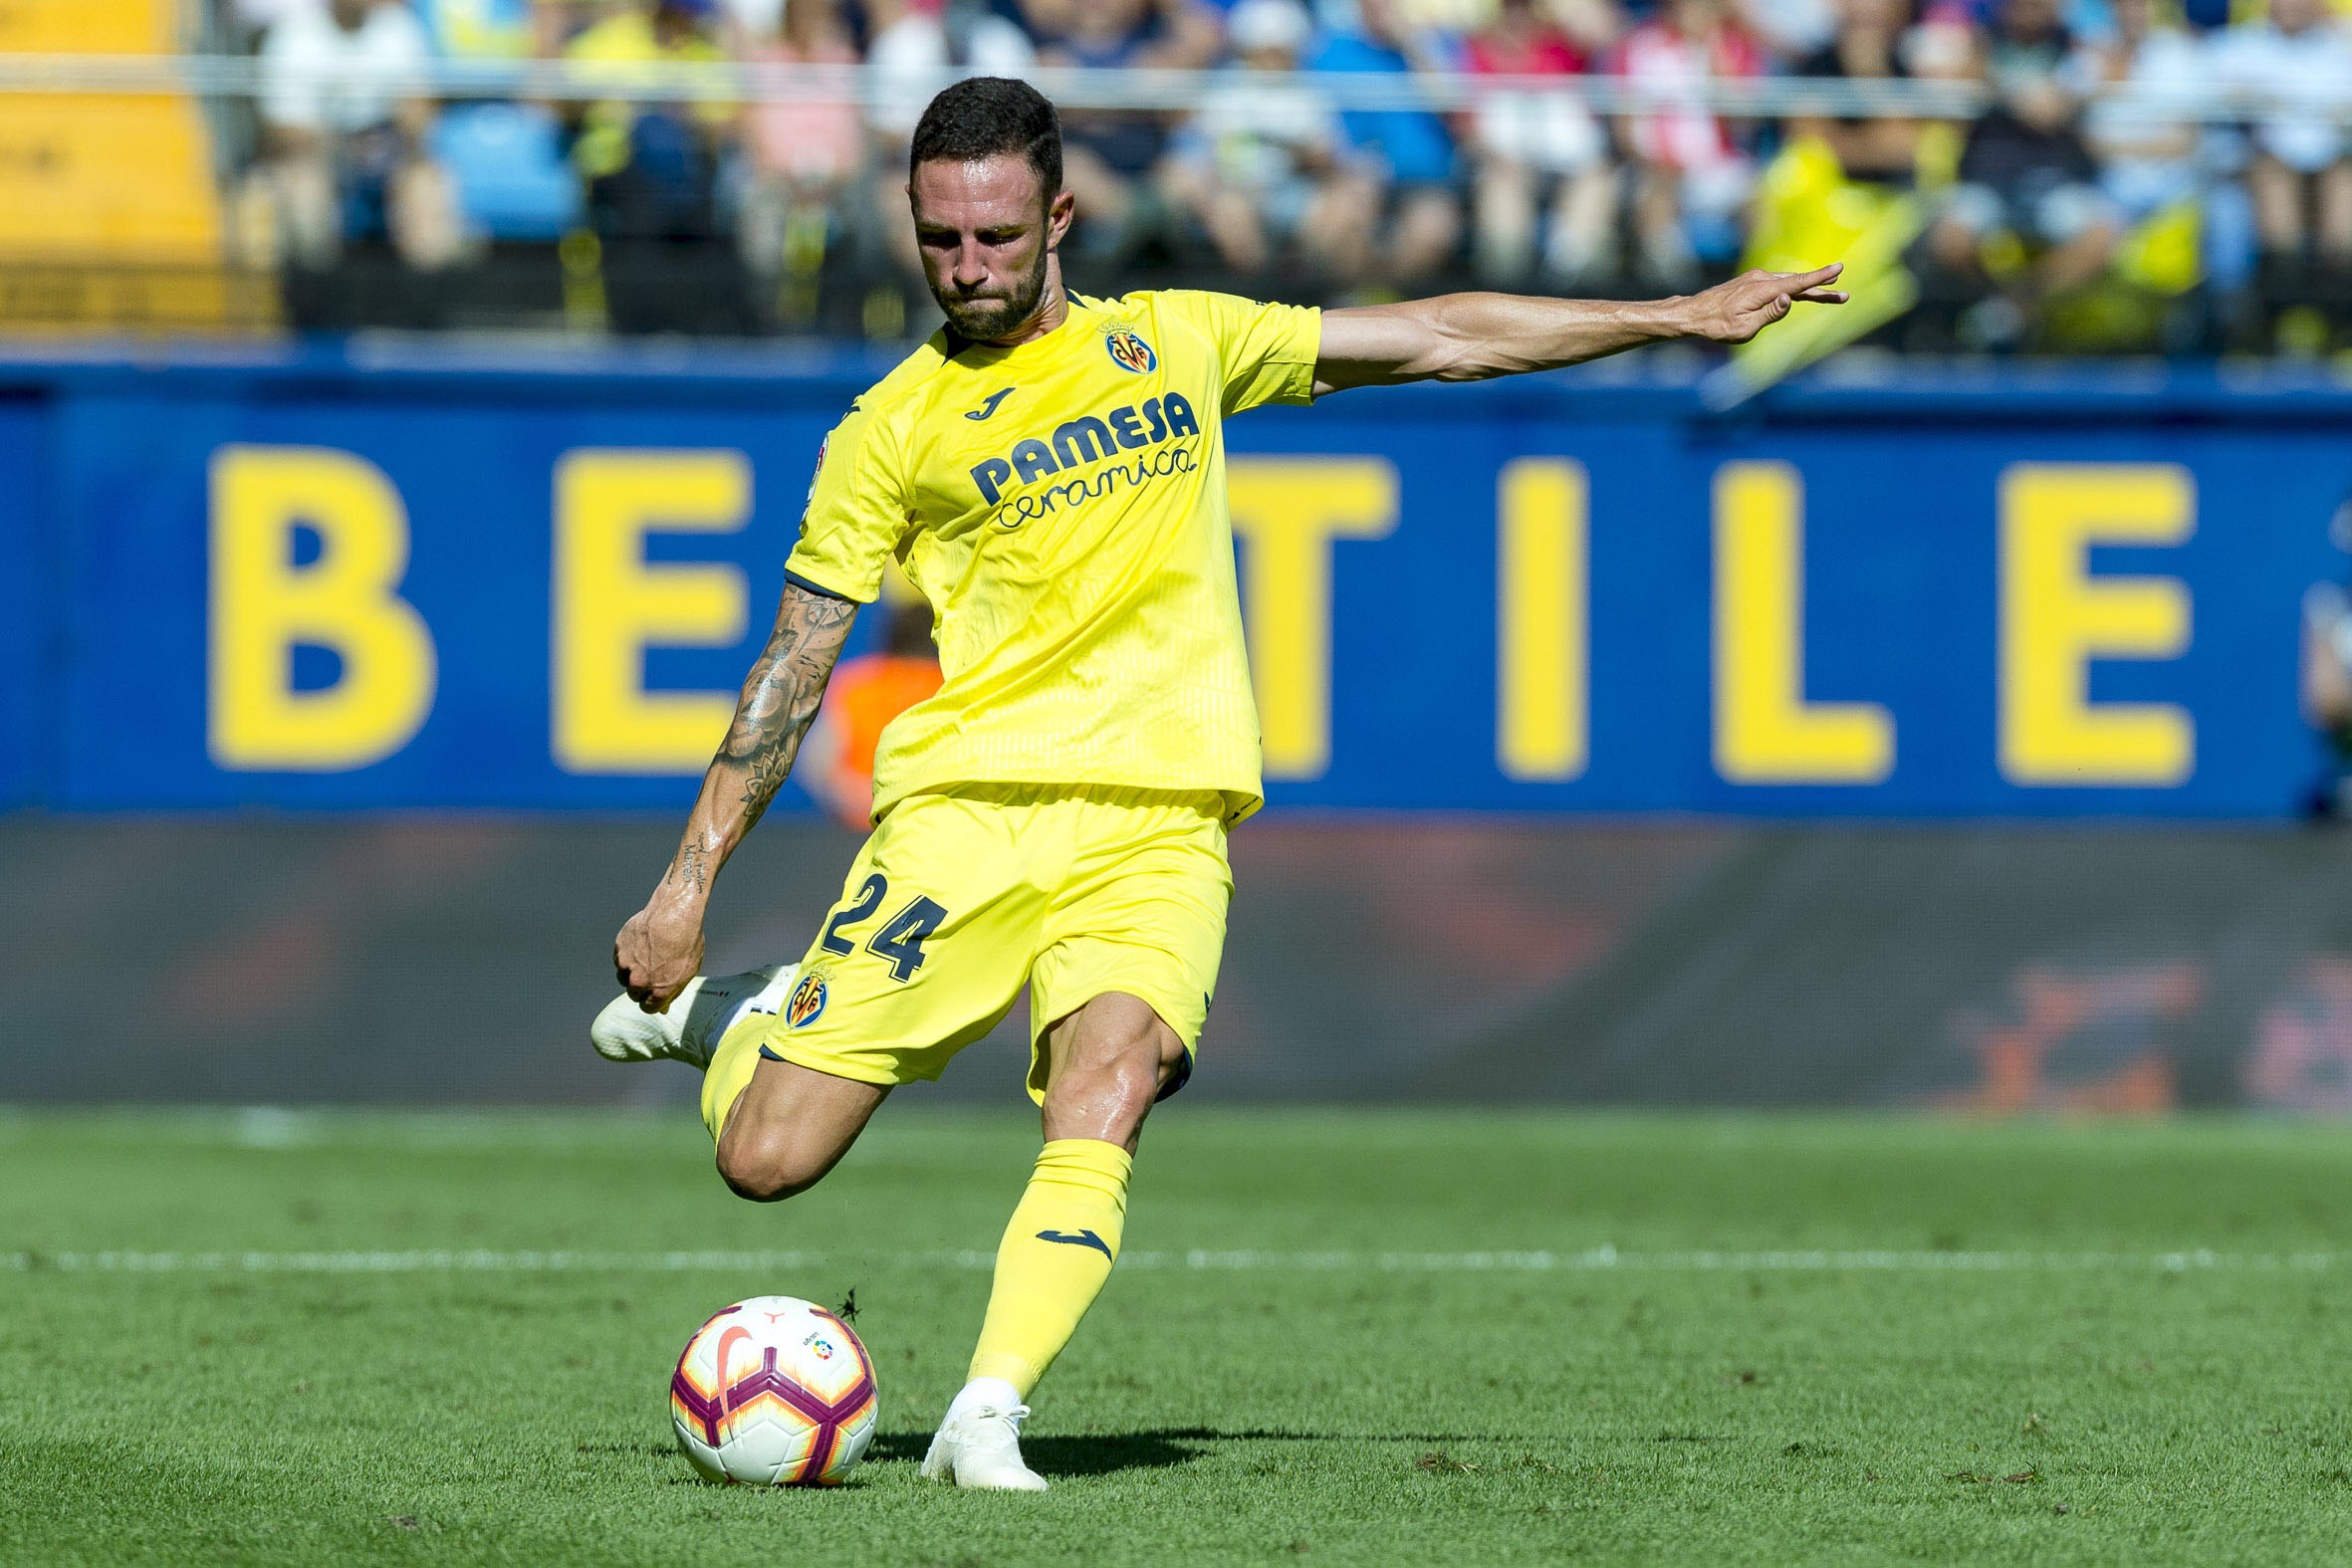 Miguel Layún speaks to Mexico’s Récord about his fine recent form